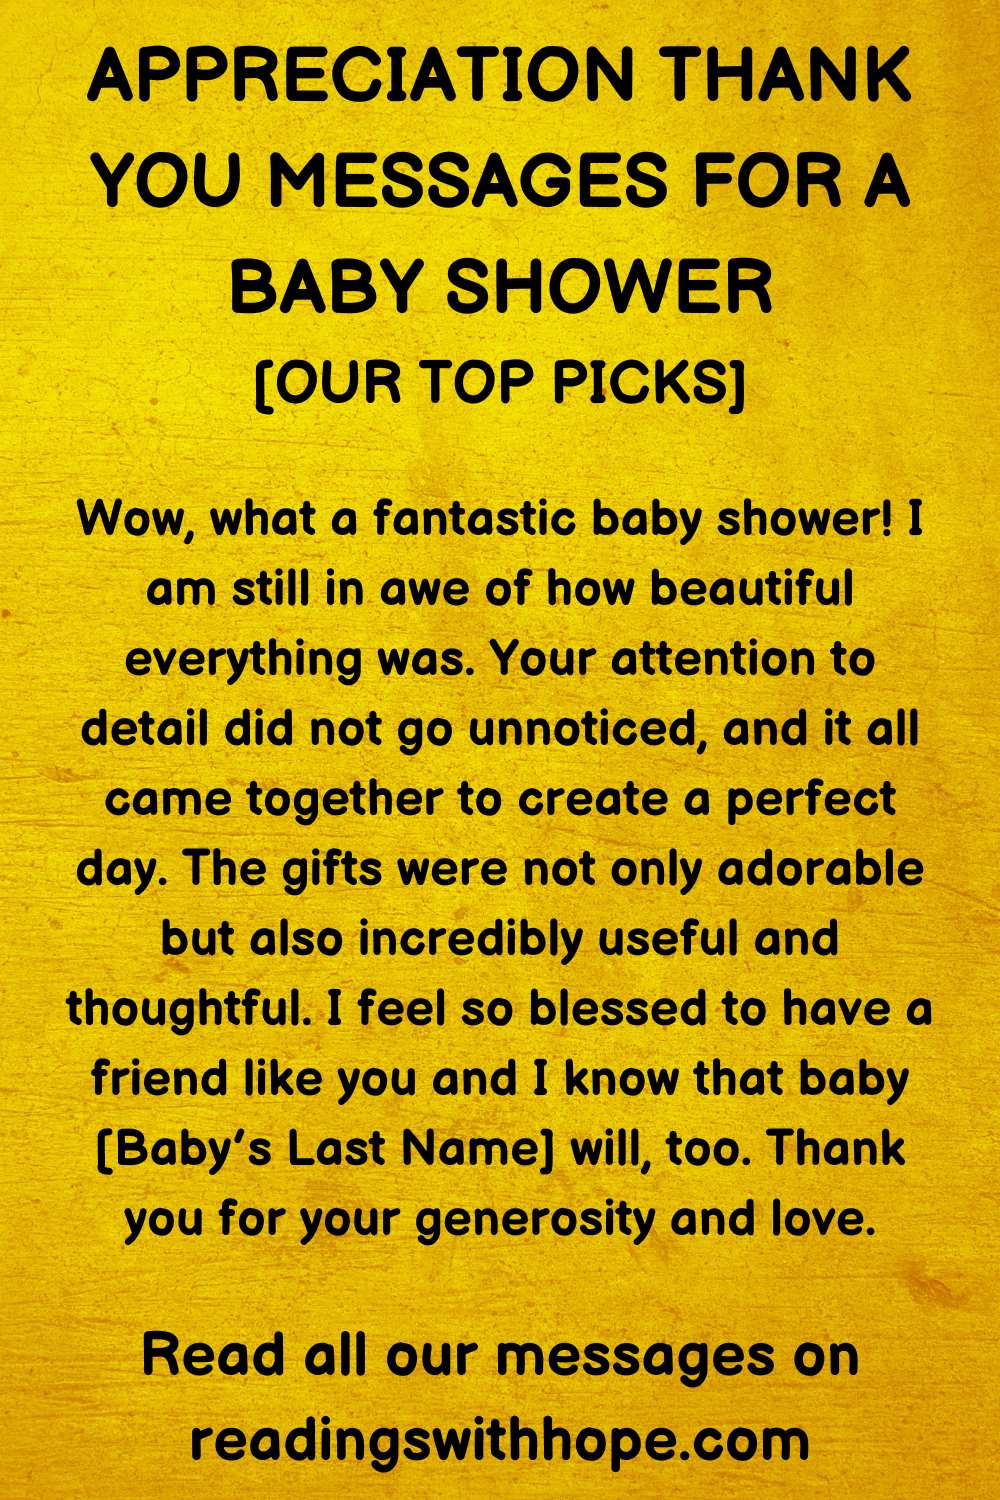 Appreciation Thank You Message for a Baby Shower